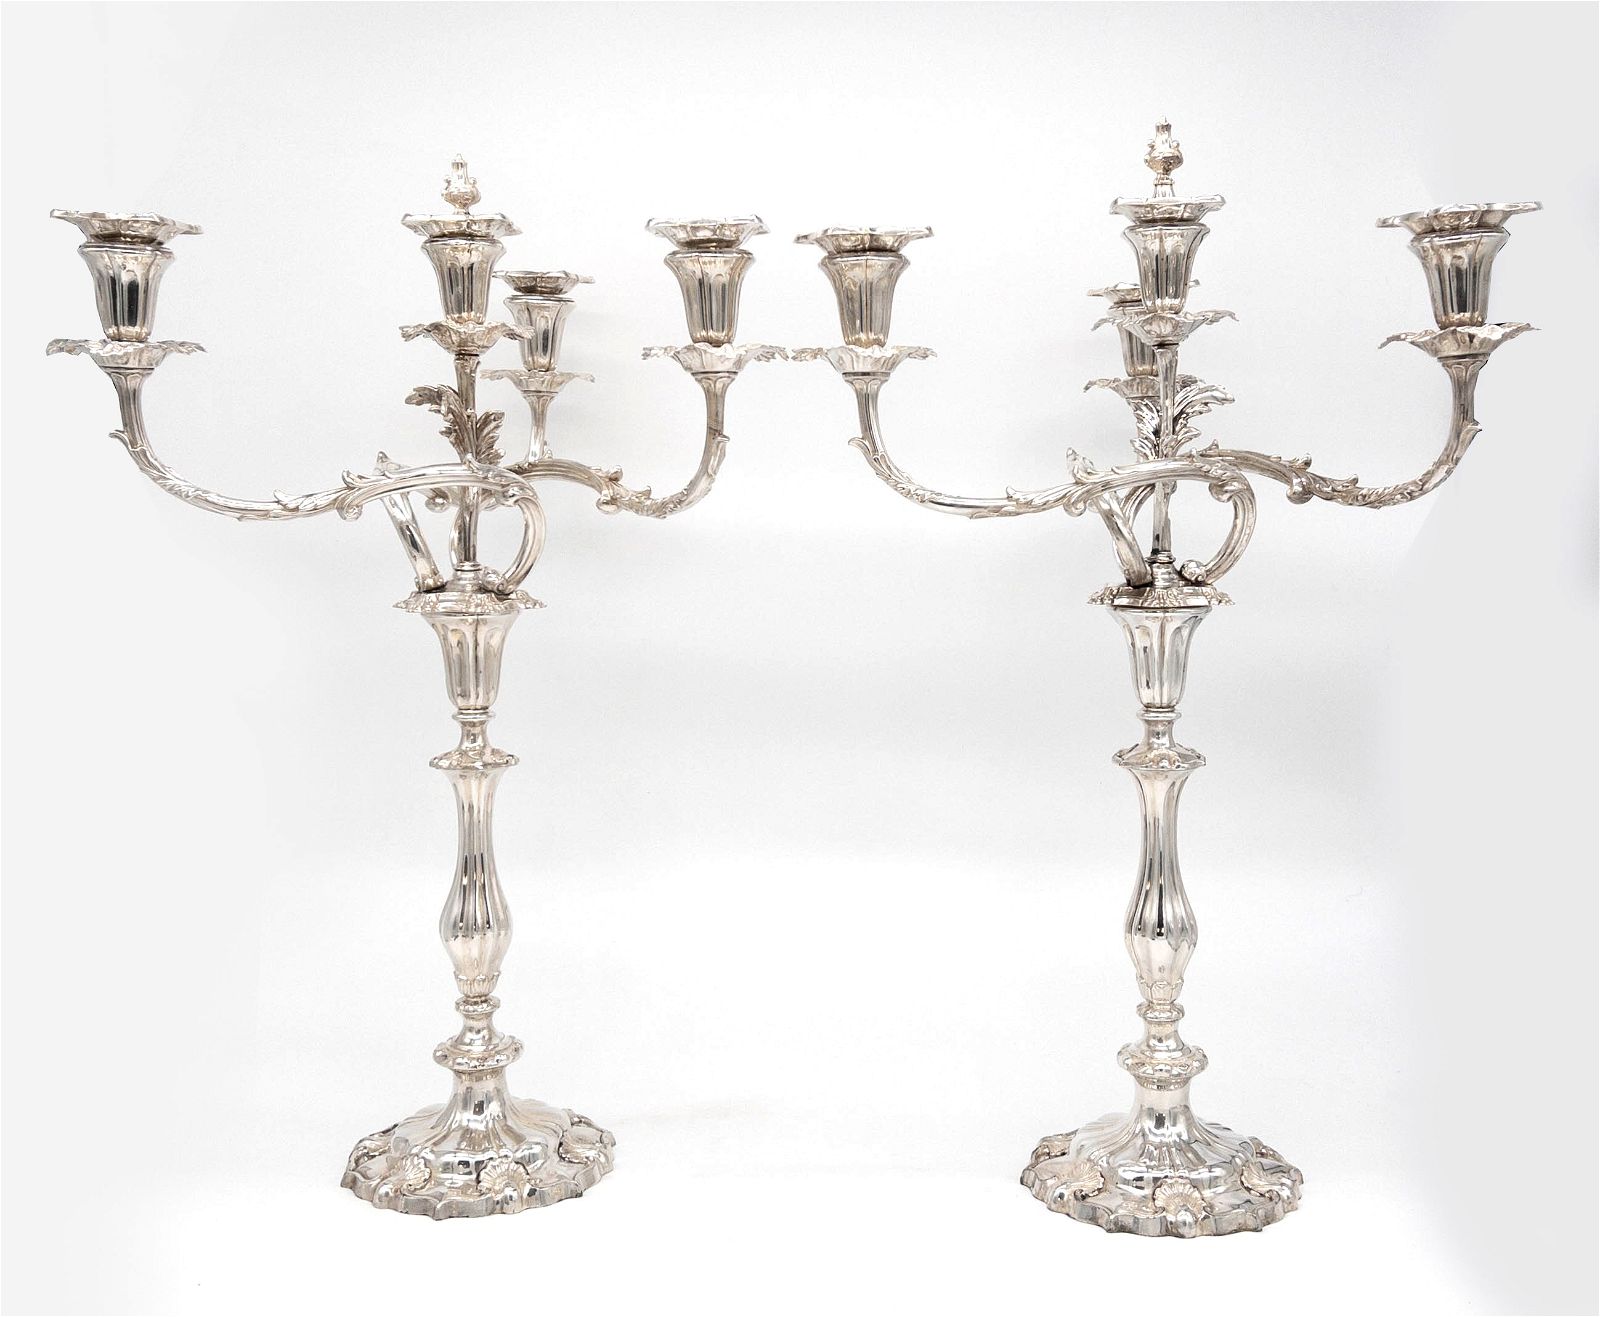 PAIR OF ENGLISH SILVER PLATE CANDELABRAPair 3d236d